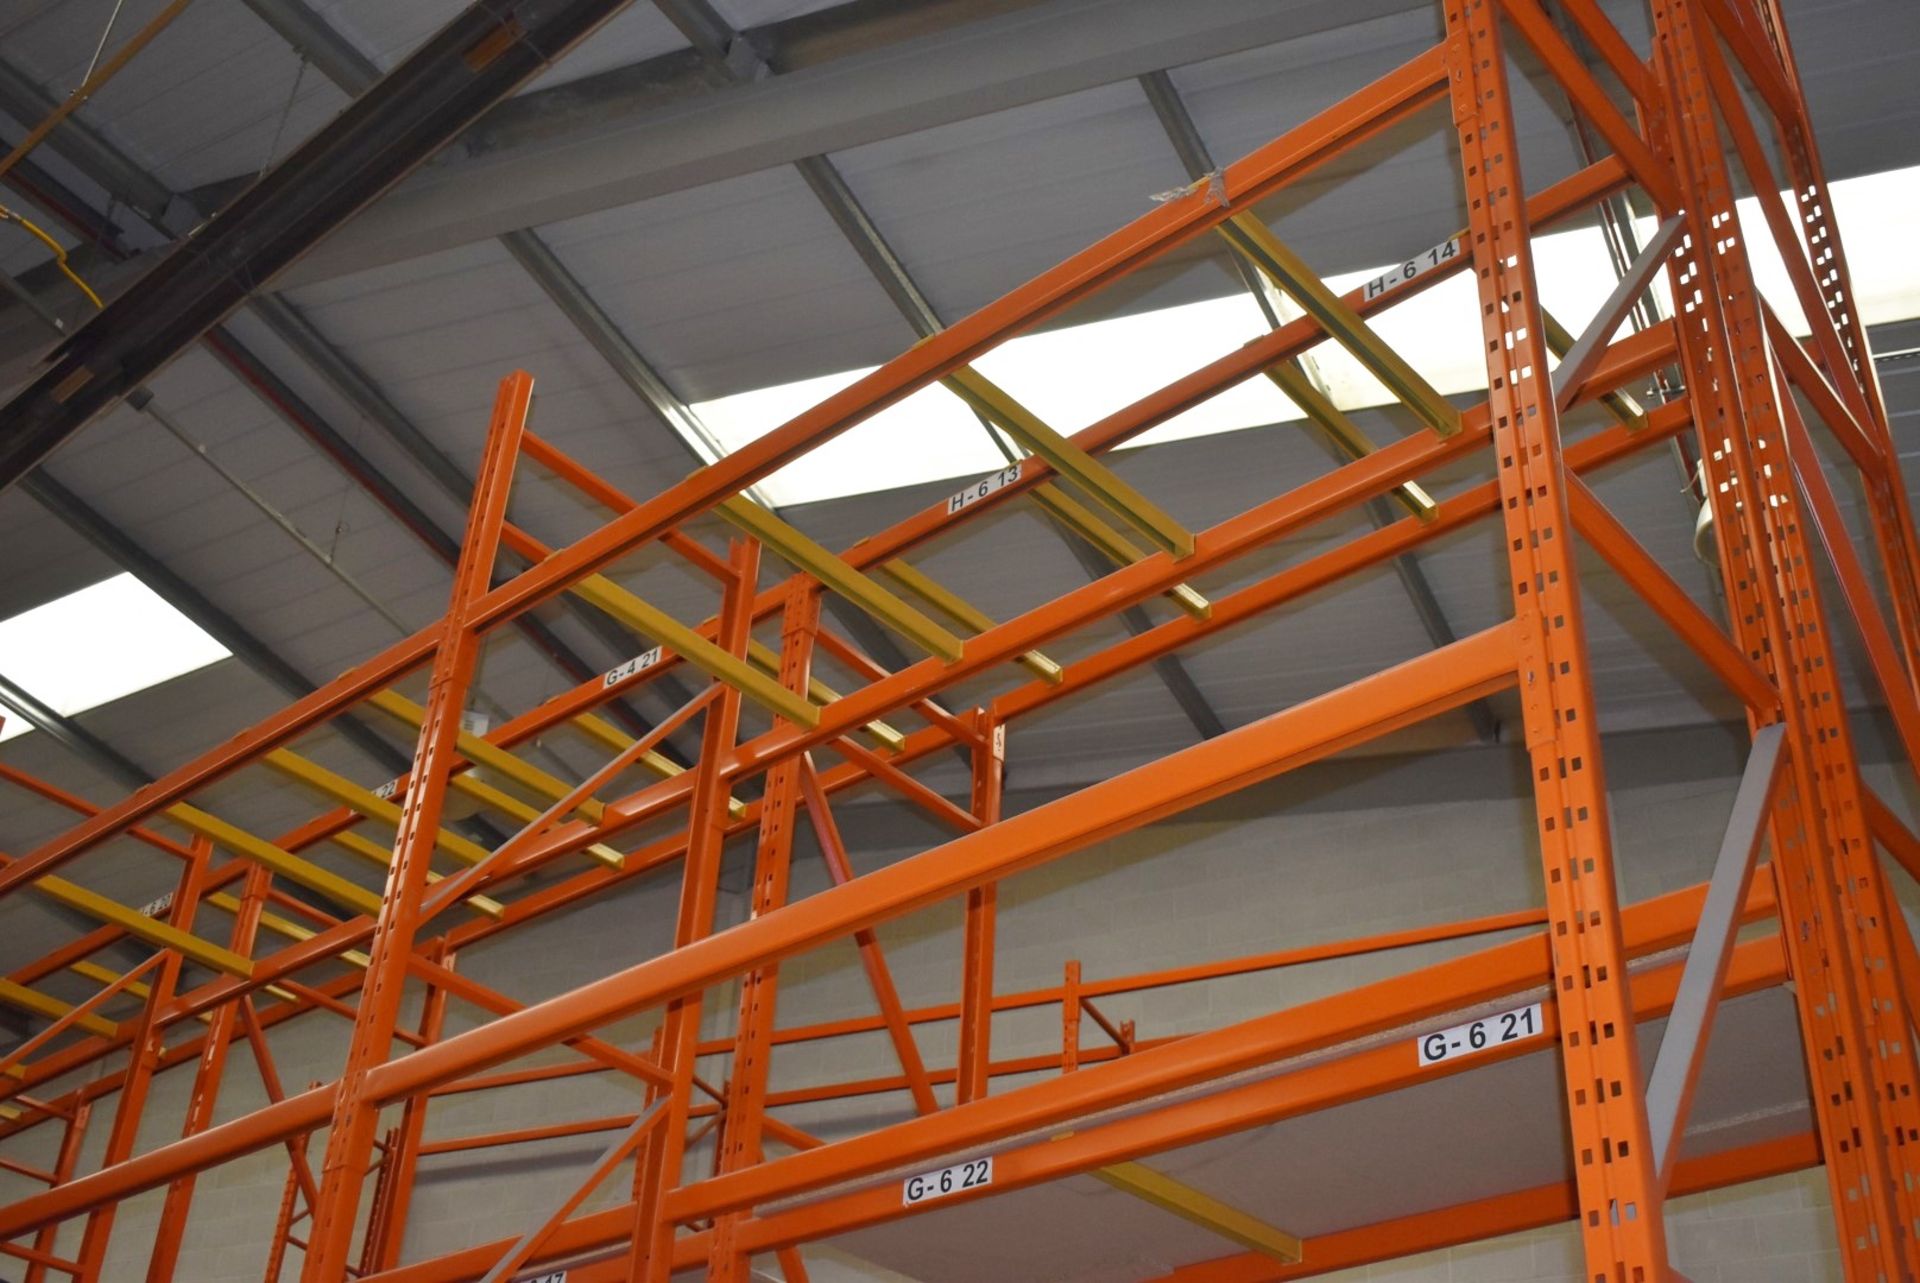 5 x Bays of RediRack Warehouse Pallet Racking - Lot Includes 6 x Uprights and 30 x Crossbeams - - Image 5 of 5